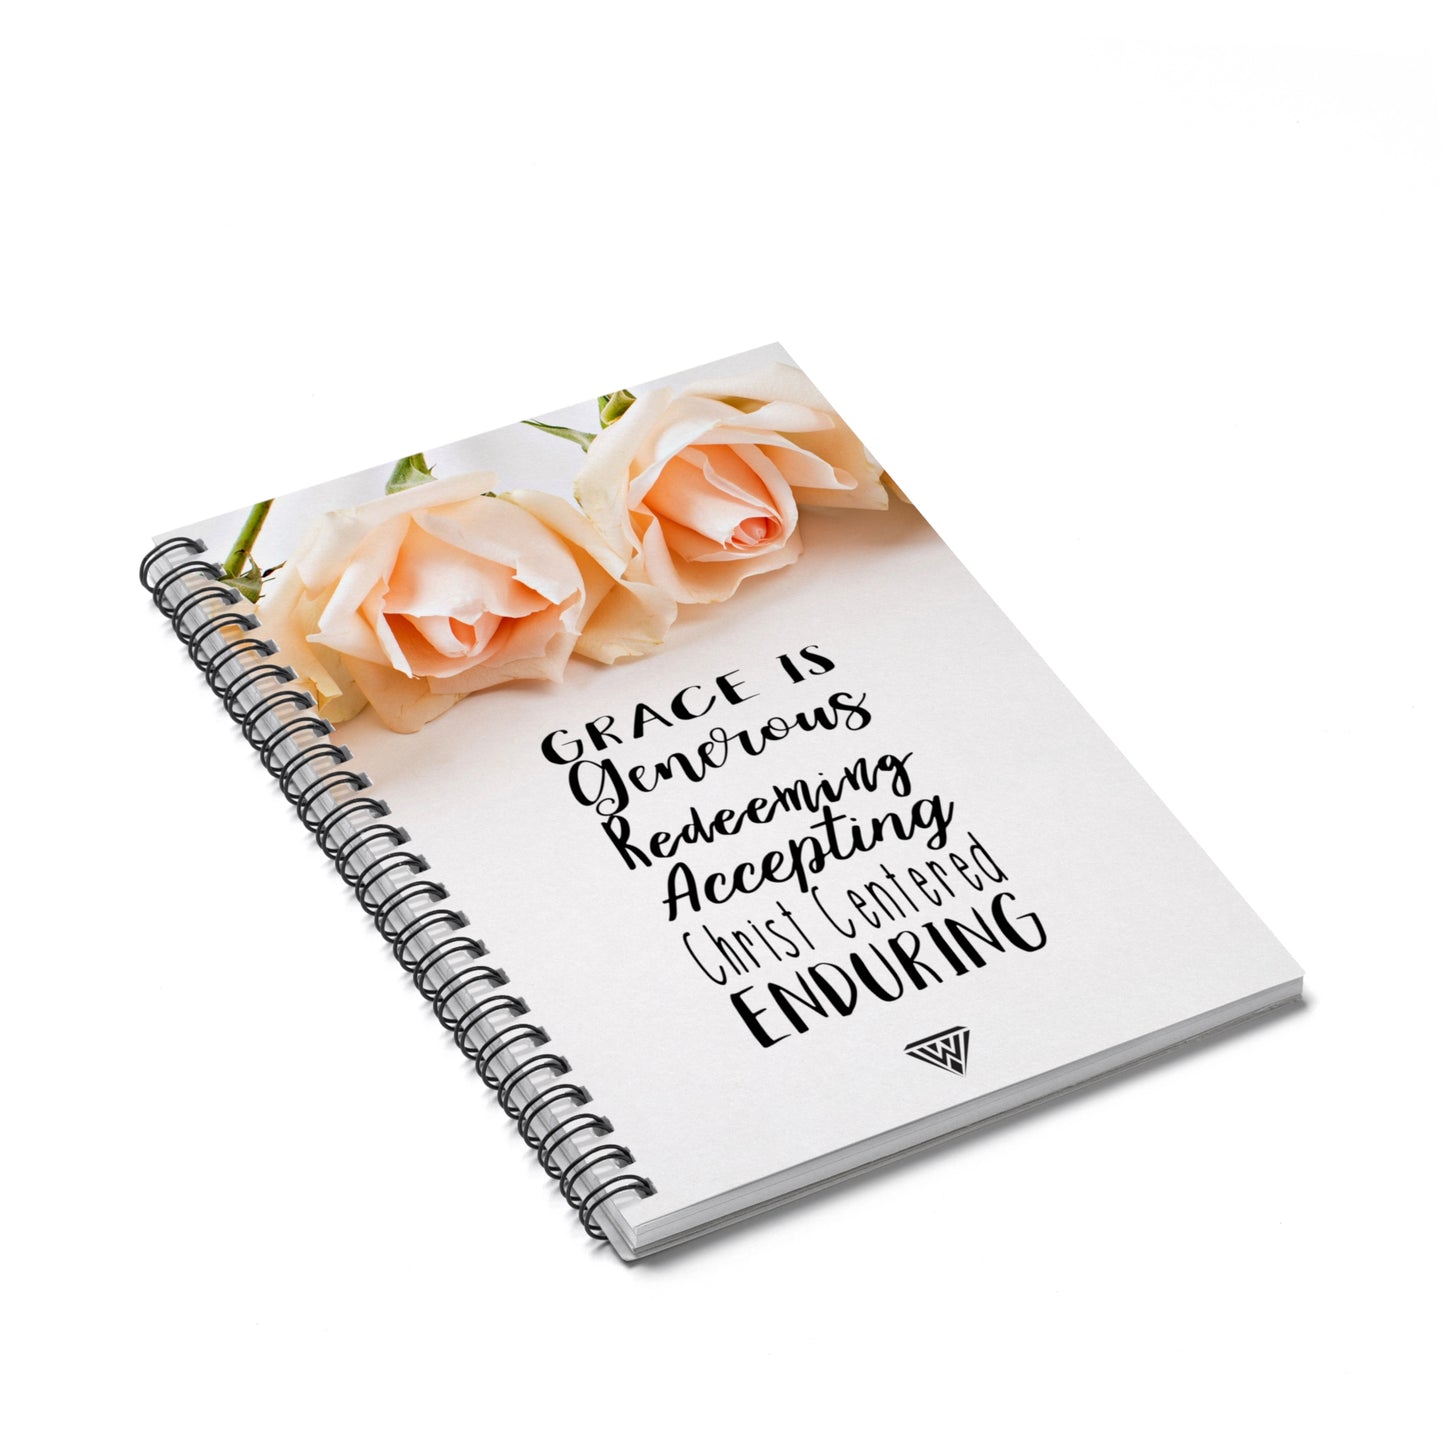 Spiral Notebook - Ruled Line (Cream Roses)